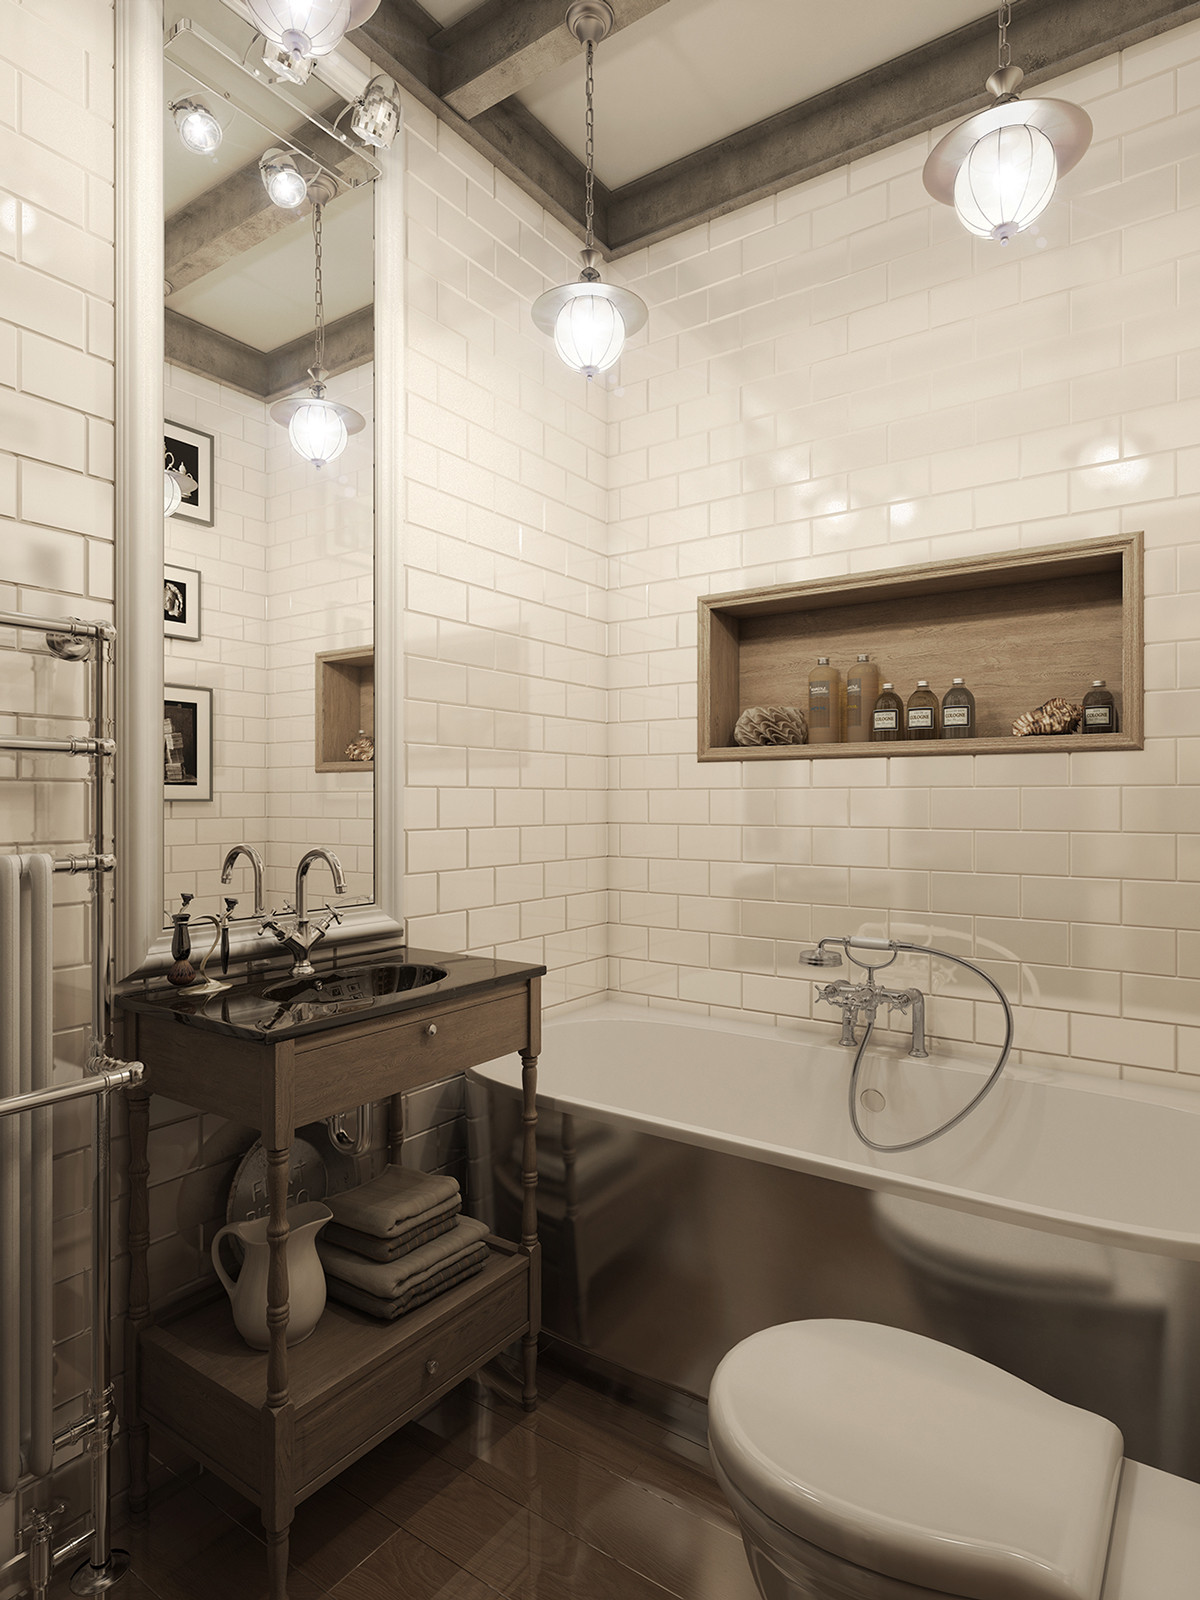 White Bathroom Wall Tiles
 Three Dark Colored Loft Apartments with Exposed Brick Walls